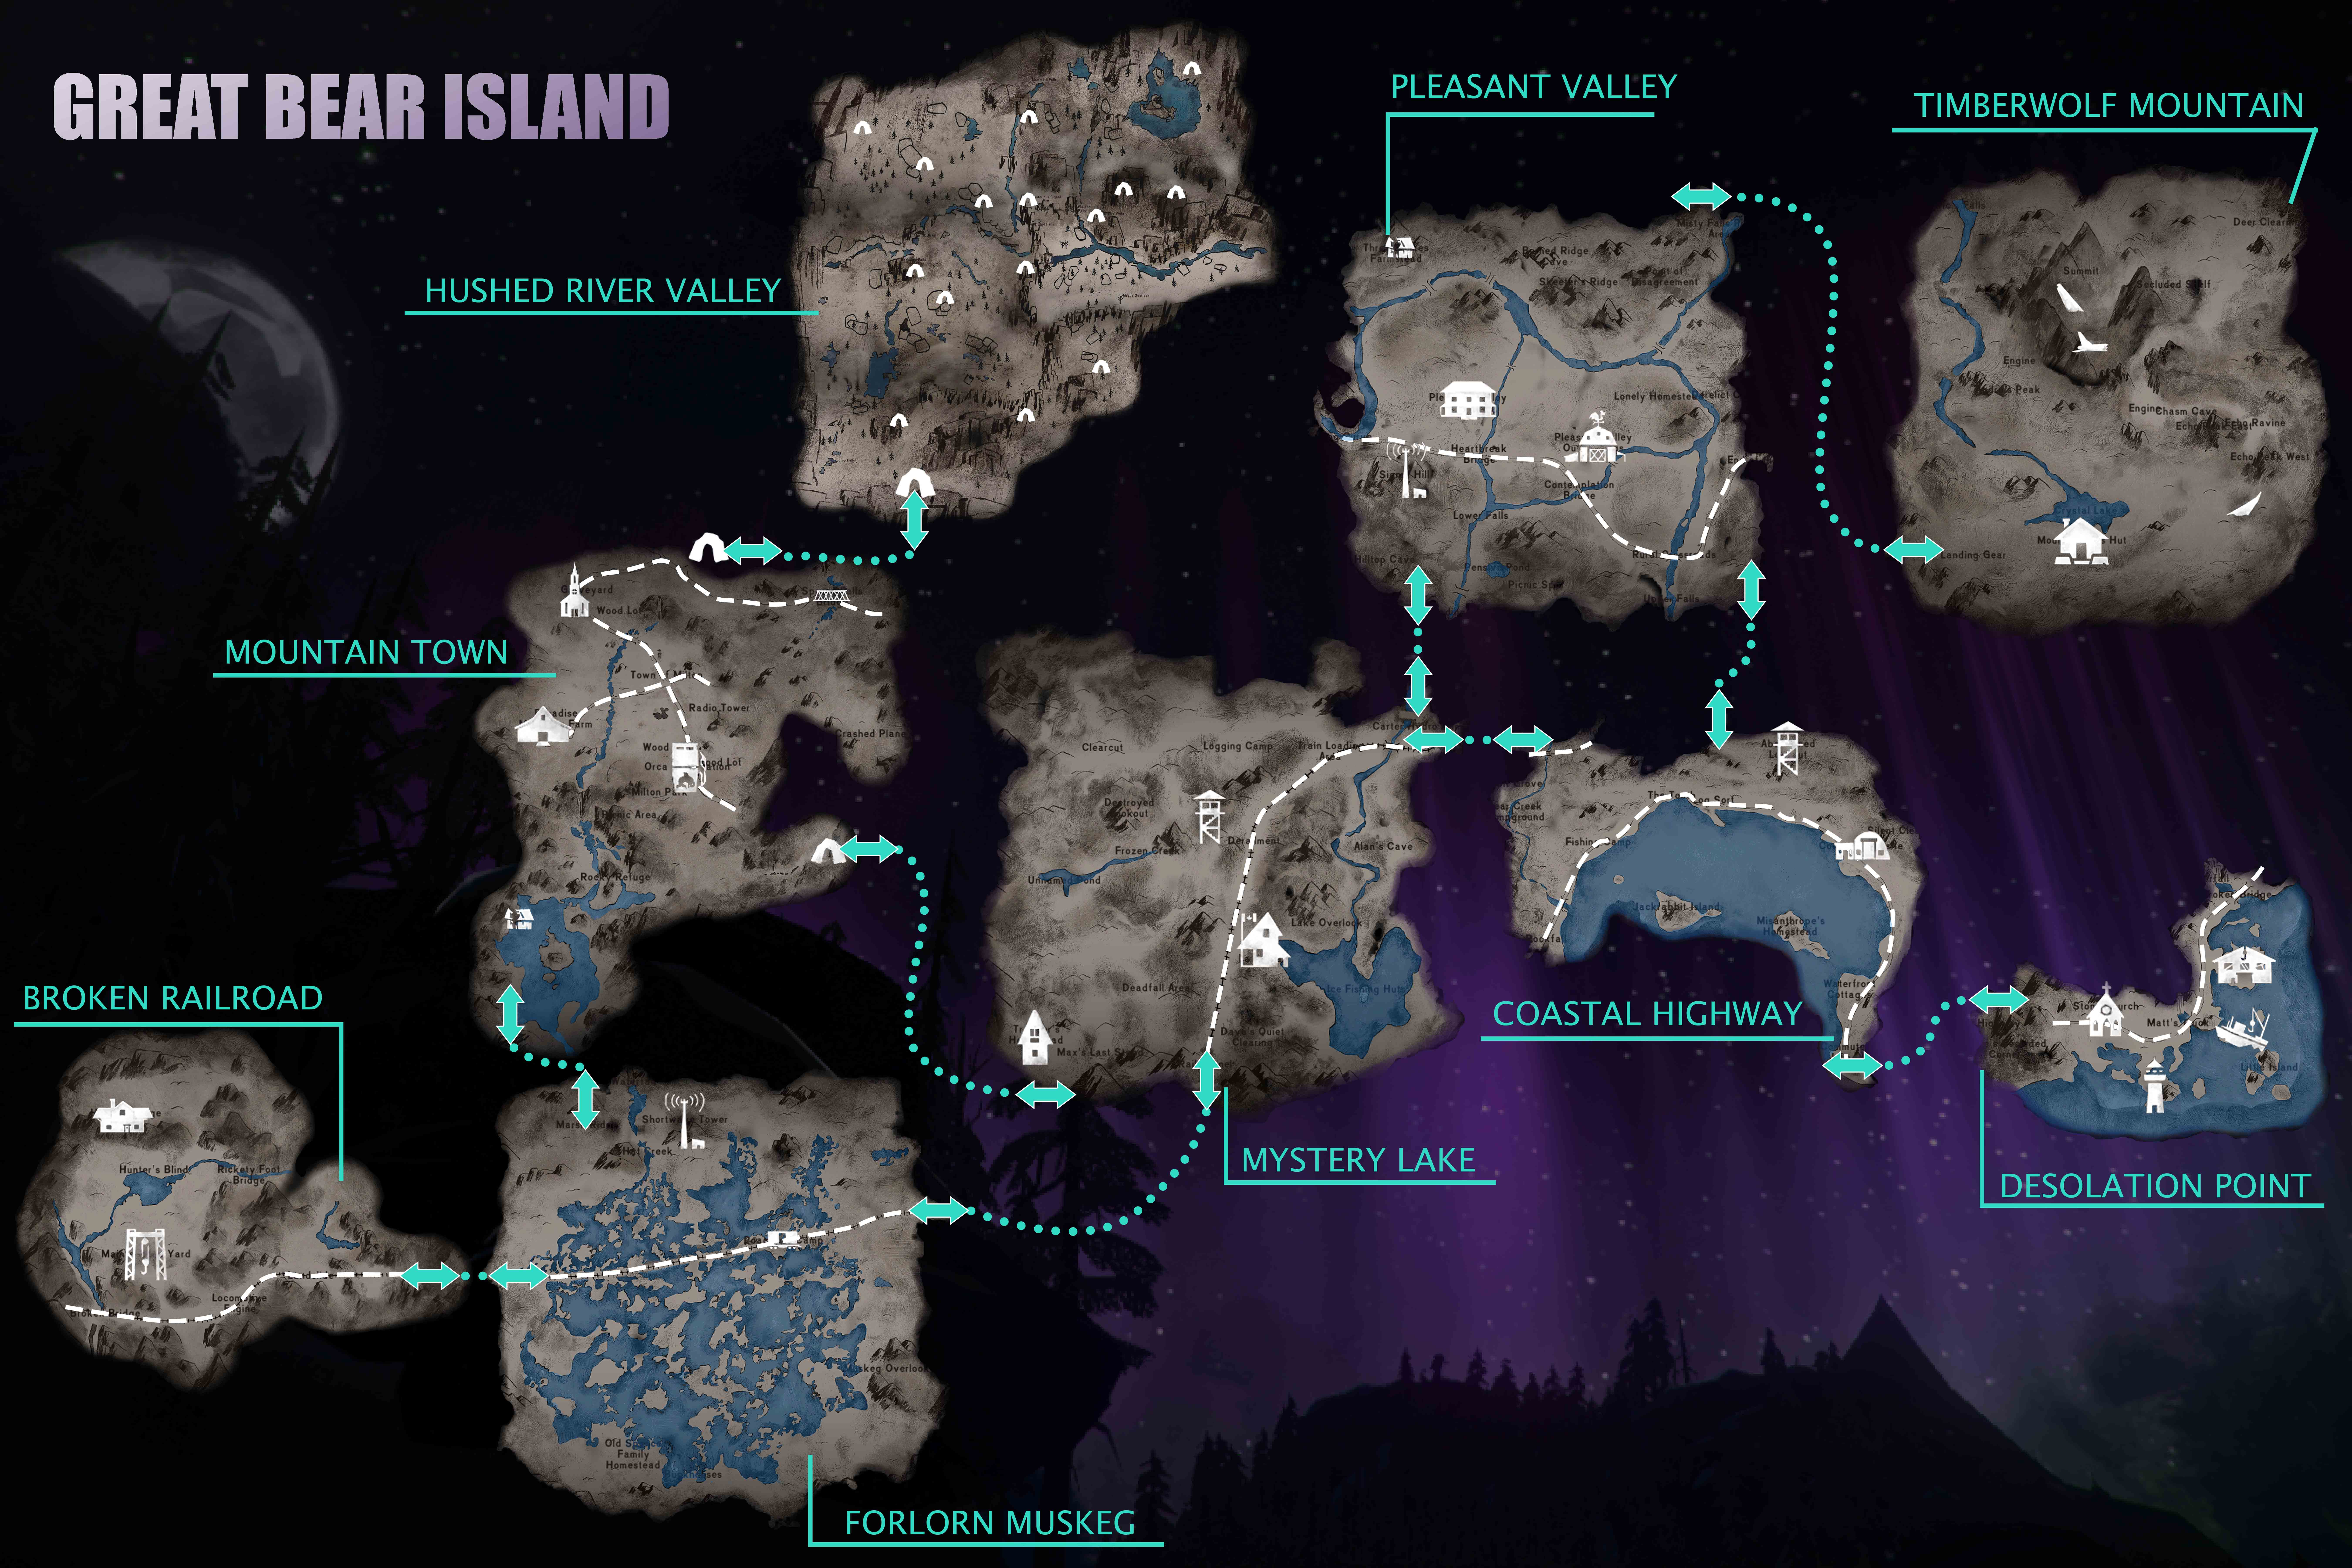 Maps are not to scale.**Credit to Crasset for the base image.